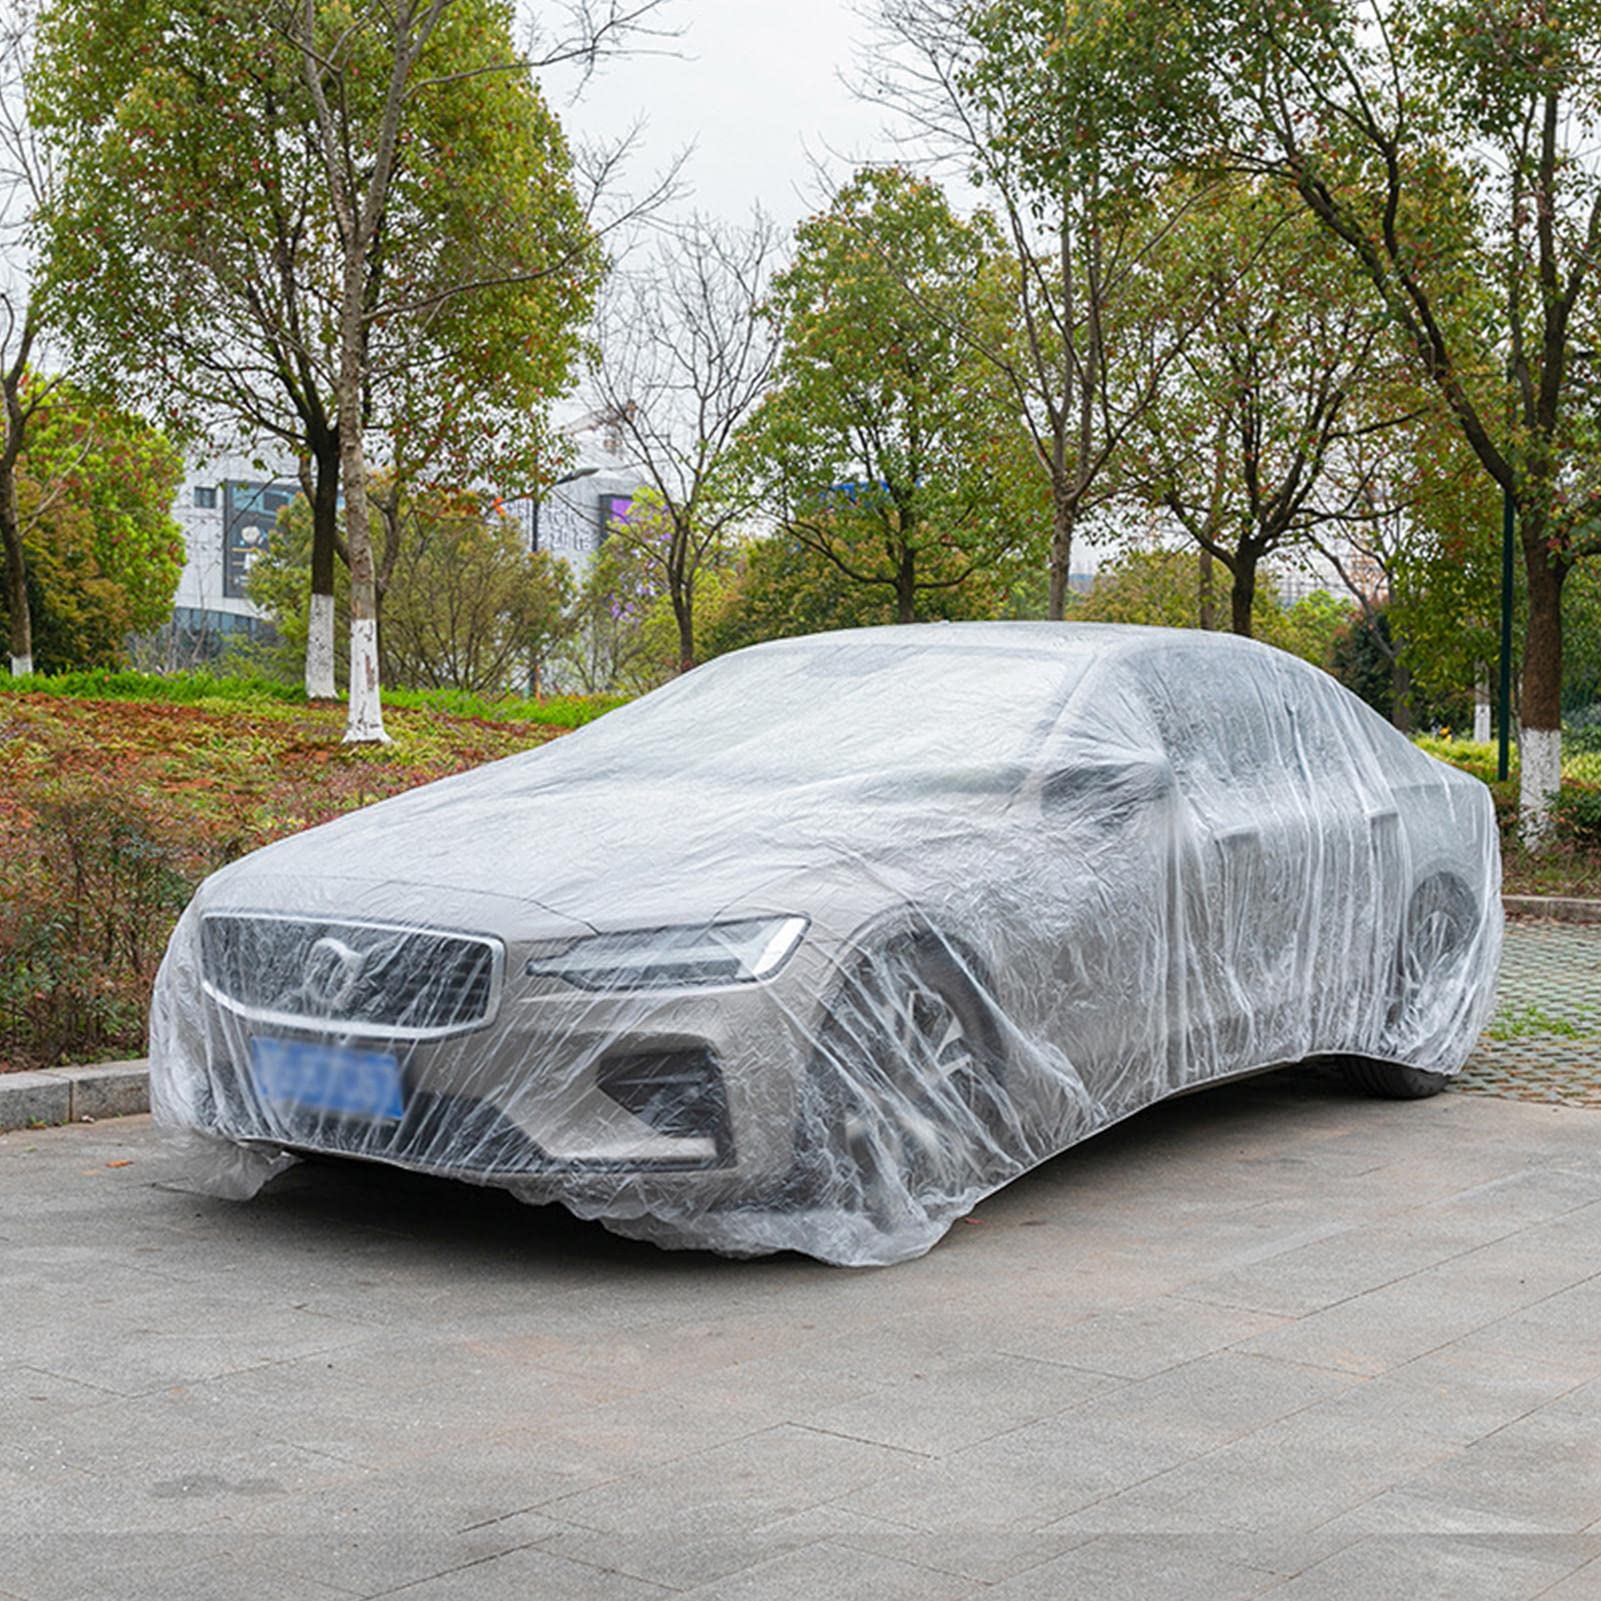 Tytlyworth Waterproof Car Cover, Disposables Car Cover, Clear PE Car Shield, Transparent Car Protective Covers with Elastic Band, Car Garage dustproof, Waterproof car Cover von Tytlyworth